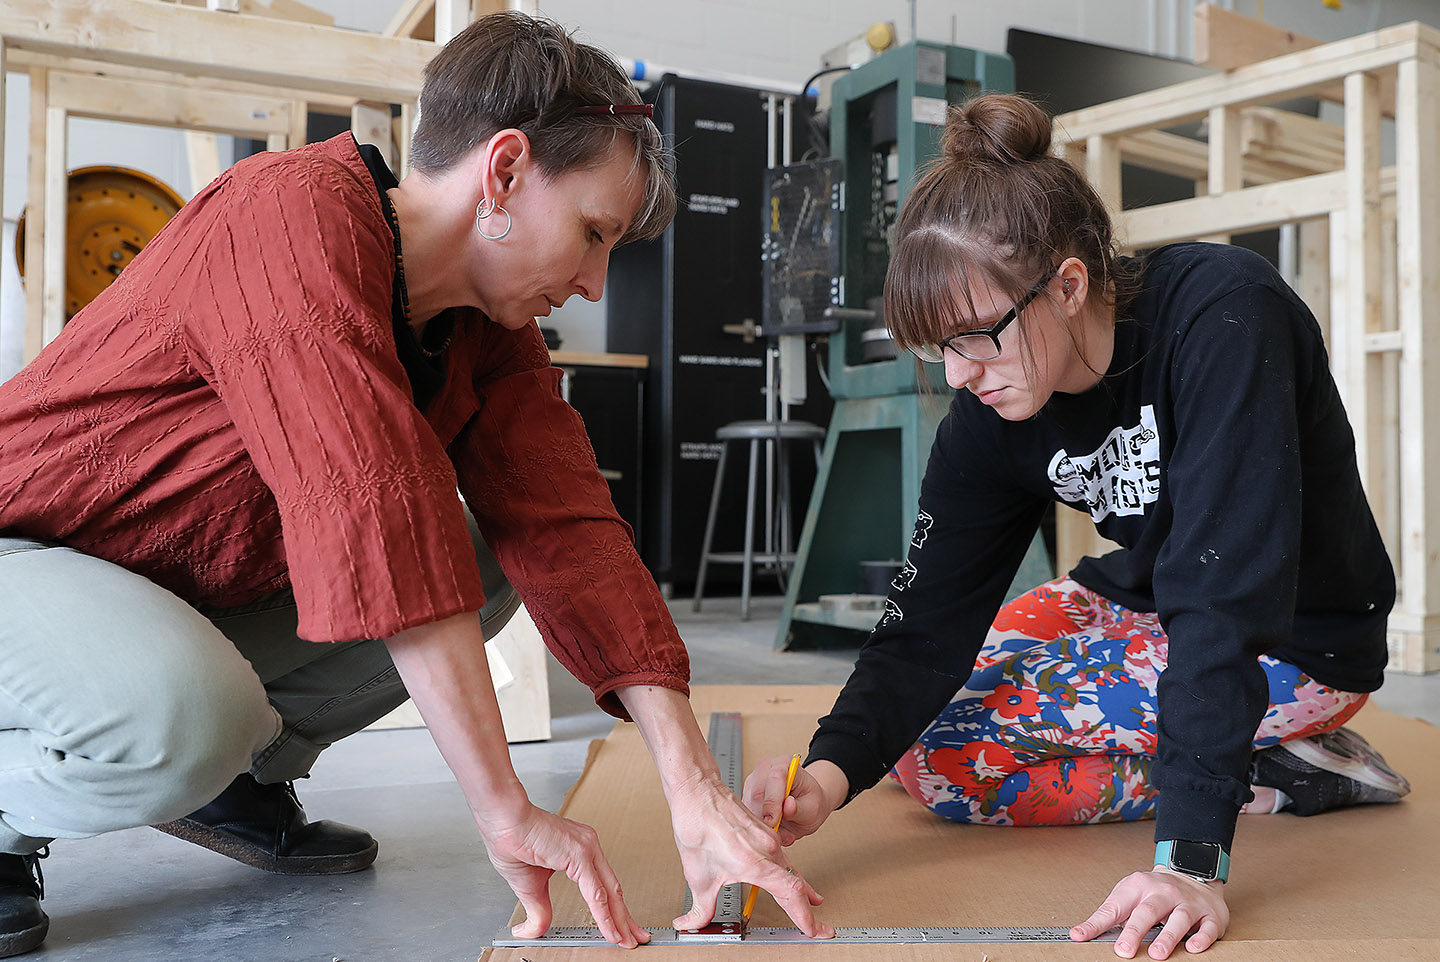 UNK’s interior and product design program utilizes several studio and lab spaces where students can experiment with different materials and create scale models and prototypes.